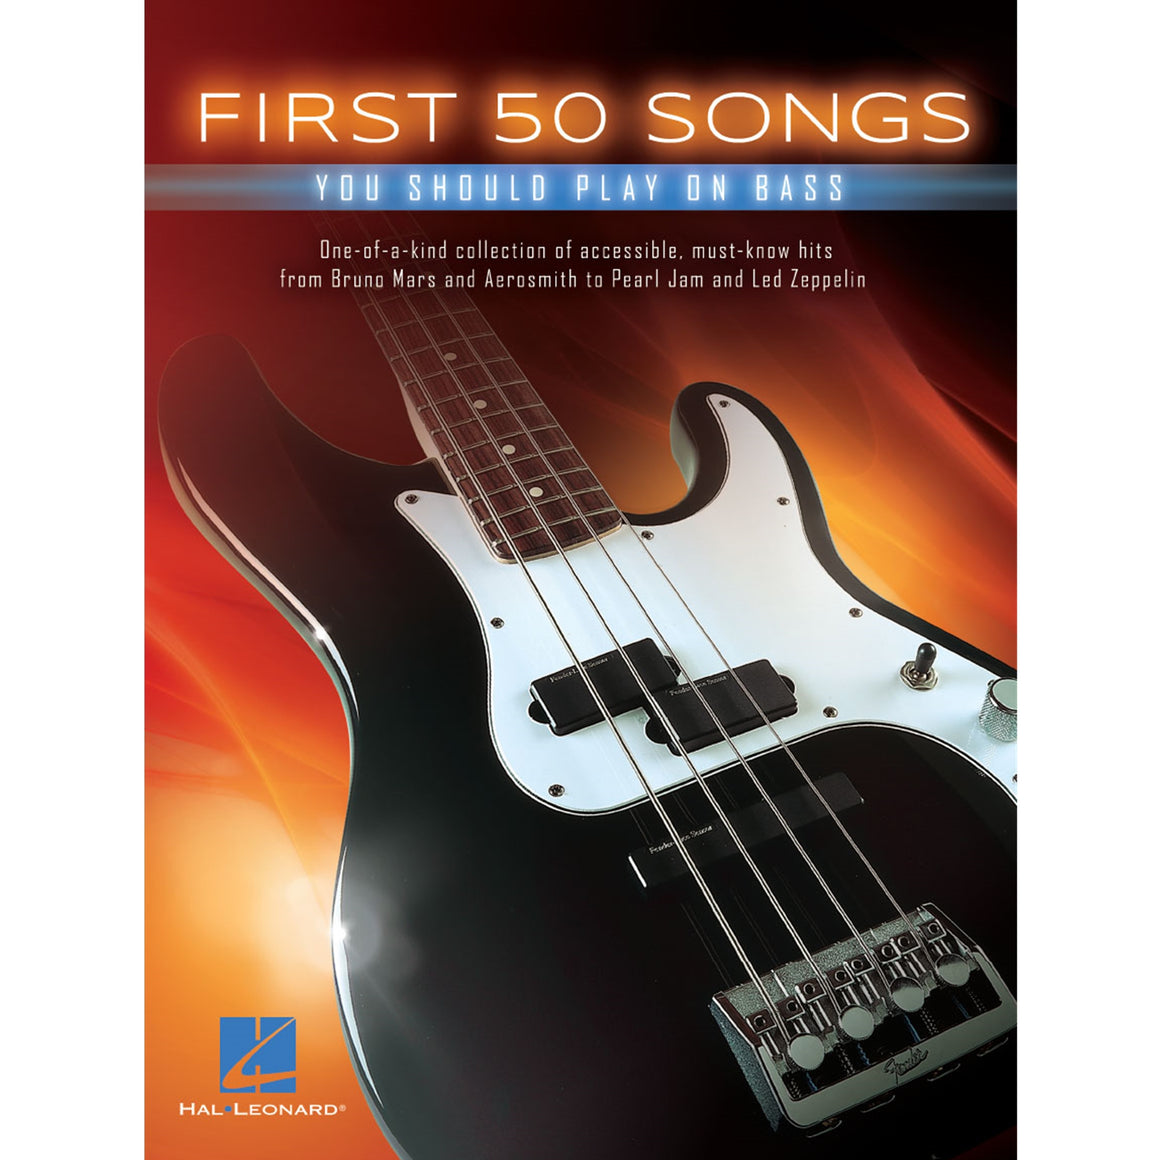 HAL LEONARD 149189 First 50 Songs You Should Play on Bass